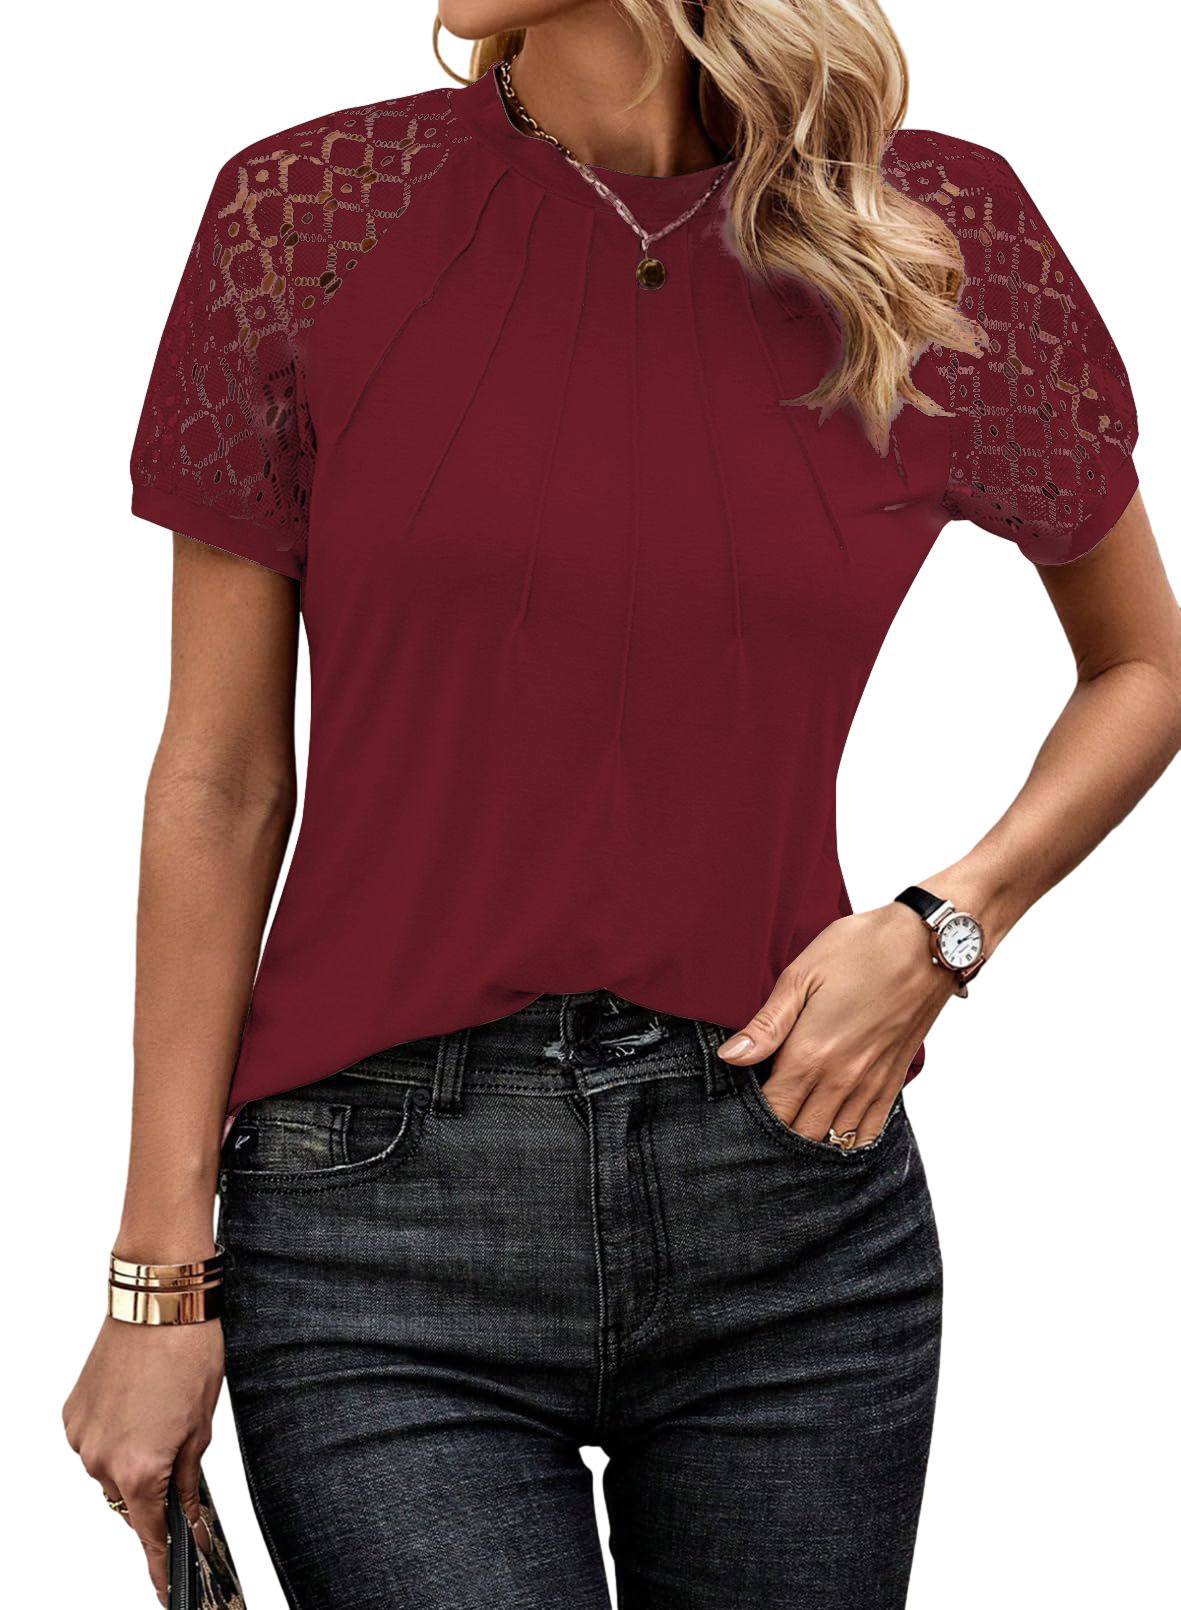 Women's Solid Color T-shirt Round Neck Lace Stitching Blouses